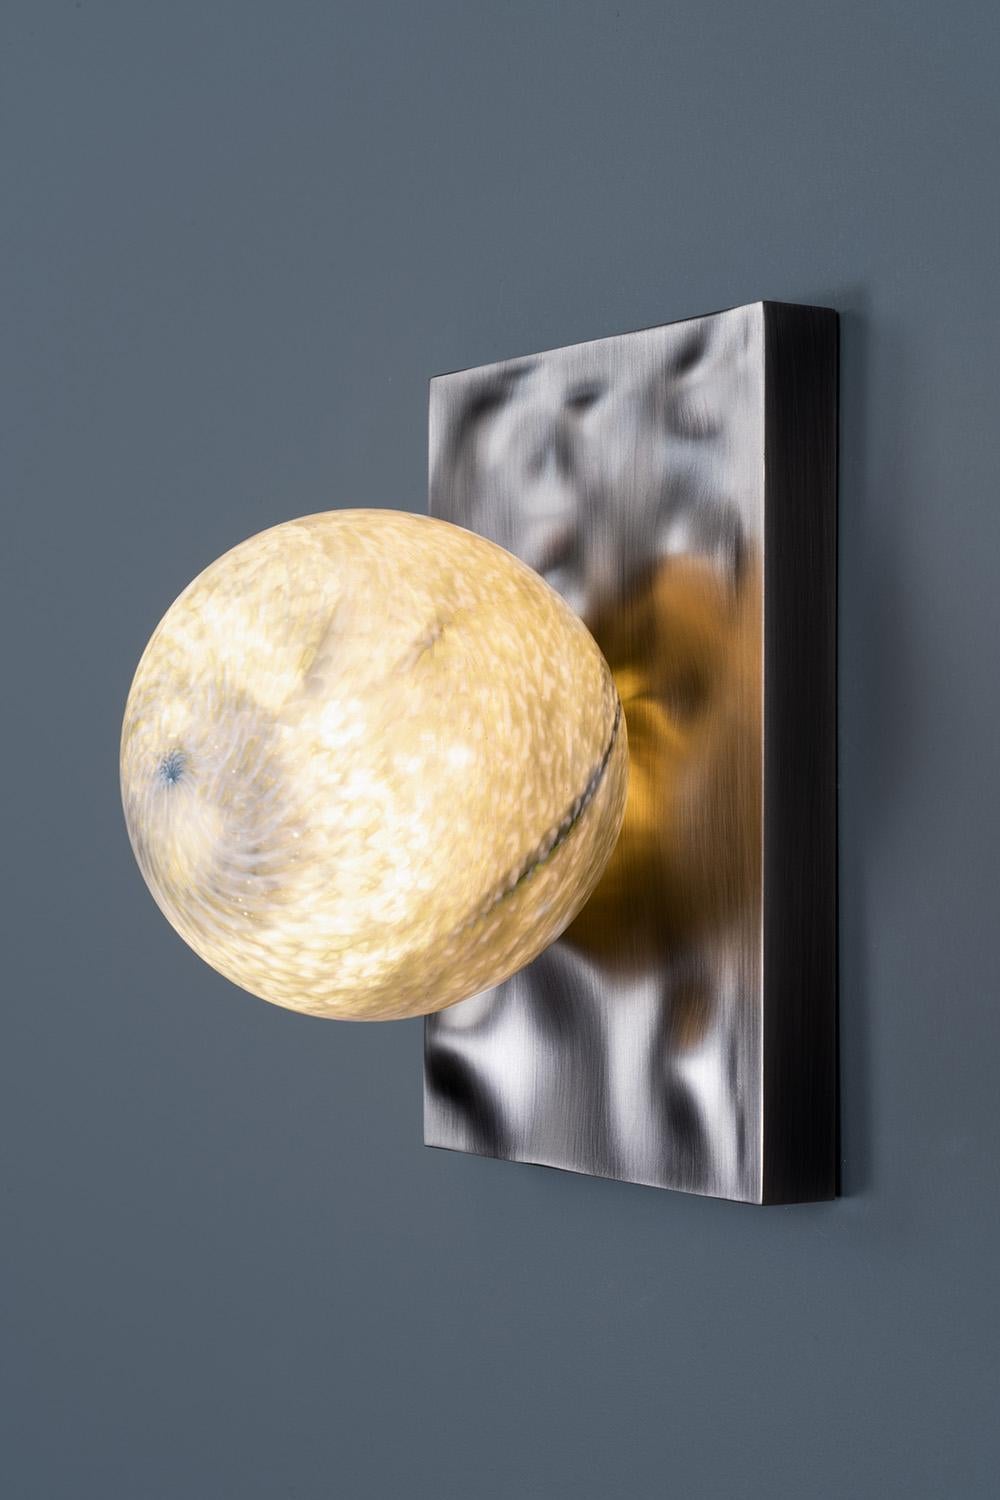 Cloudbreak: 201 Sconce was inspired by the shells and other sea life left behind in the wave patterned sand of receding tides. Like little pearls nestled in oysters, our hand blown glass sits perfectly on a wave patterned, CNC milled brass back